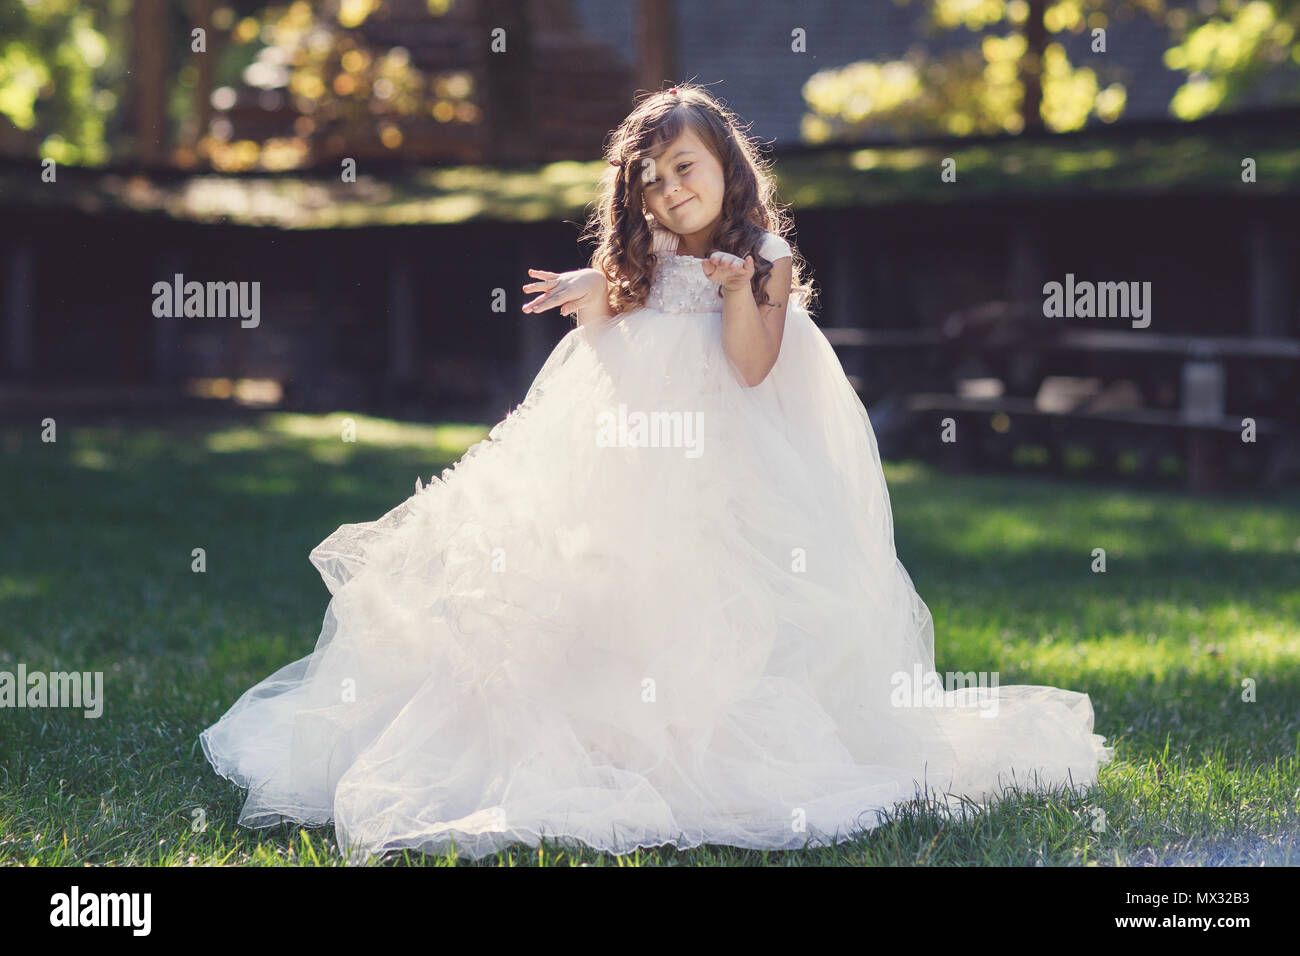 Outdoor portrait of adorable smiling little girl in white dress Stock Photo